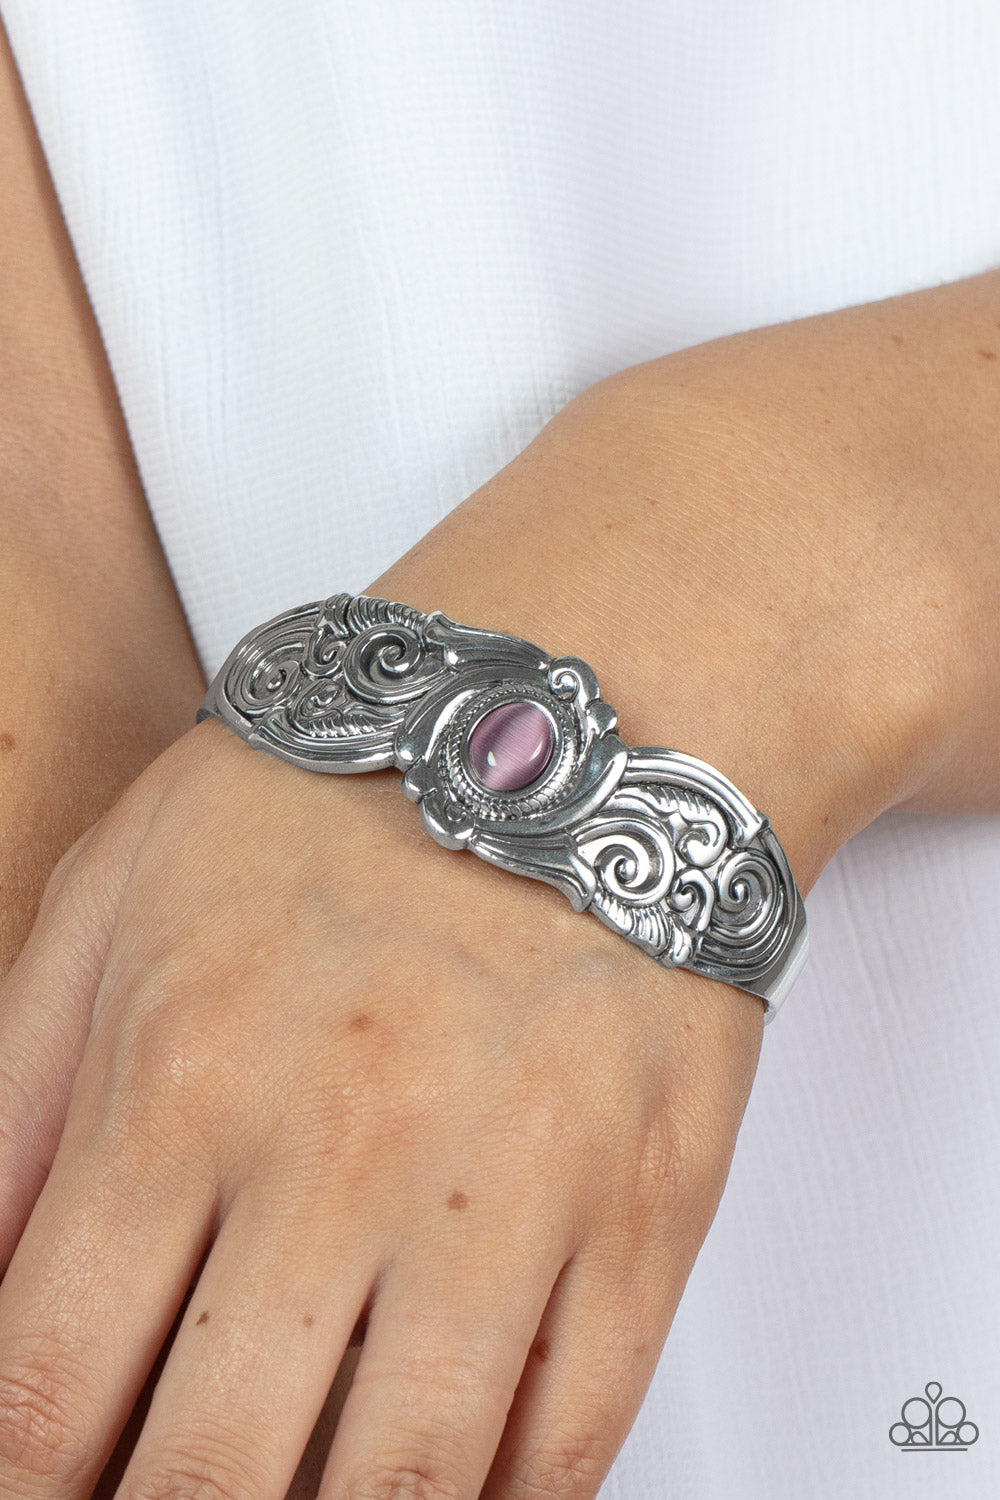 Glowing Enchantment Purple and Silver Bracelet